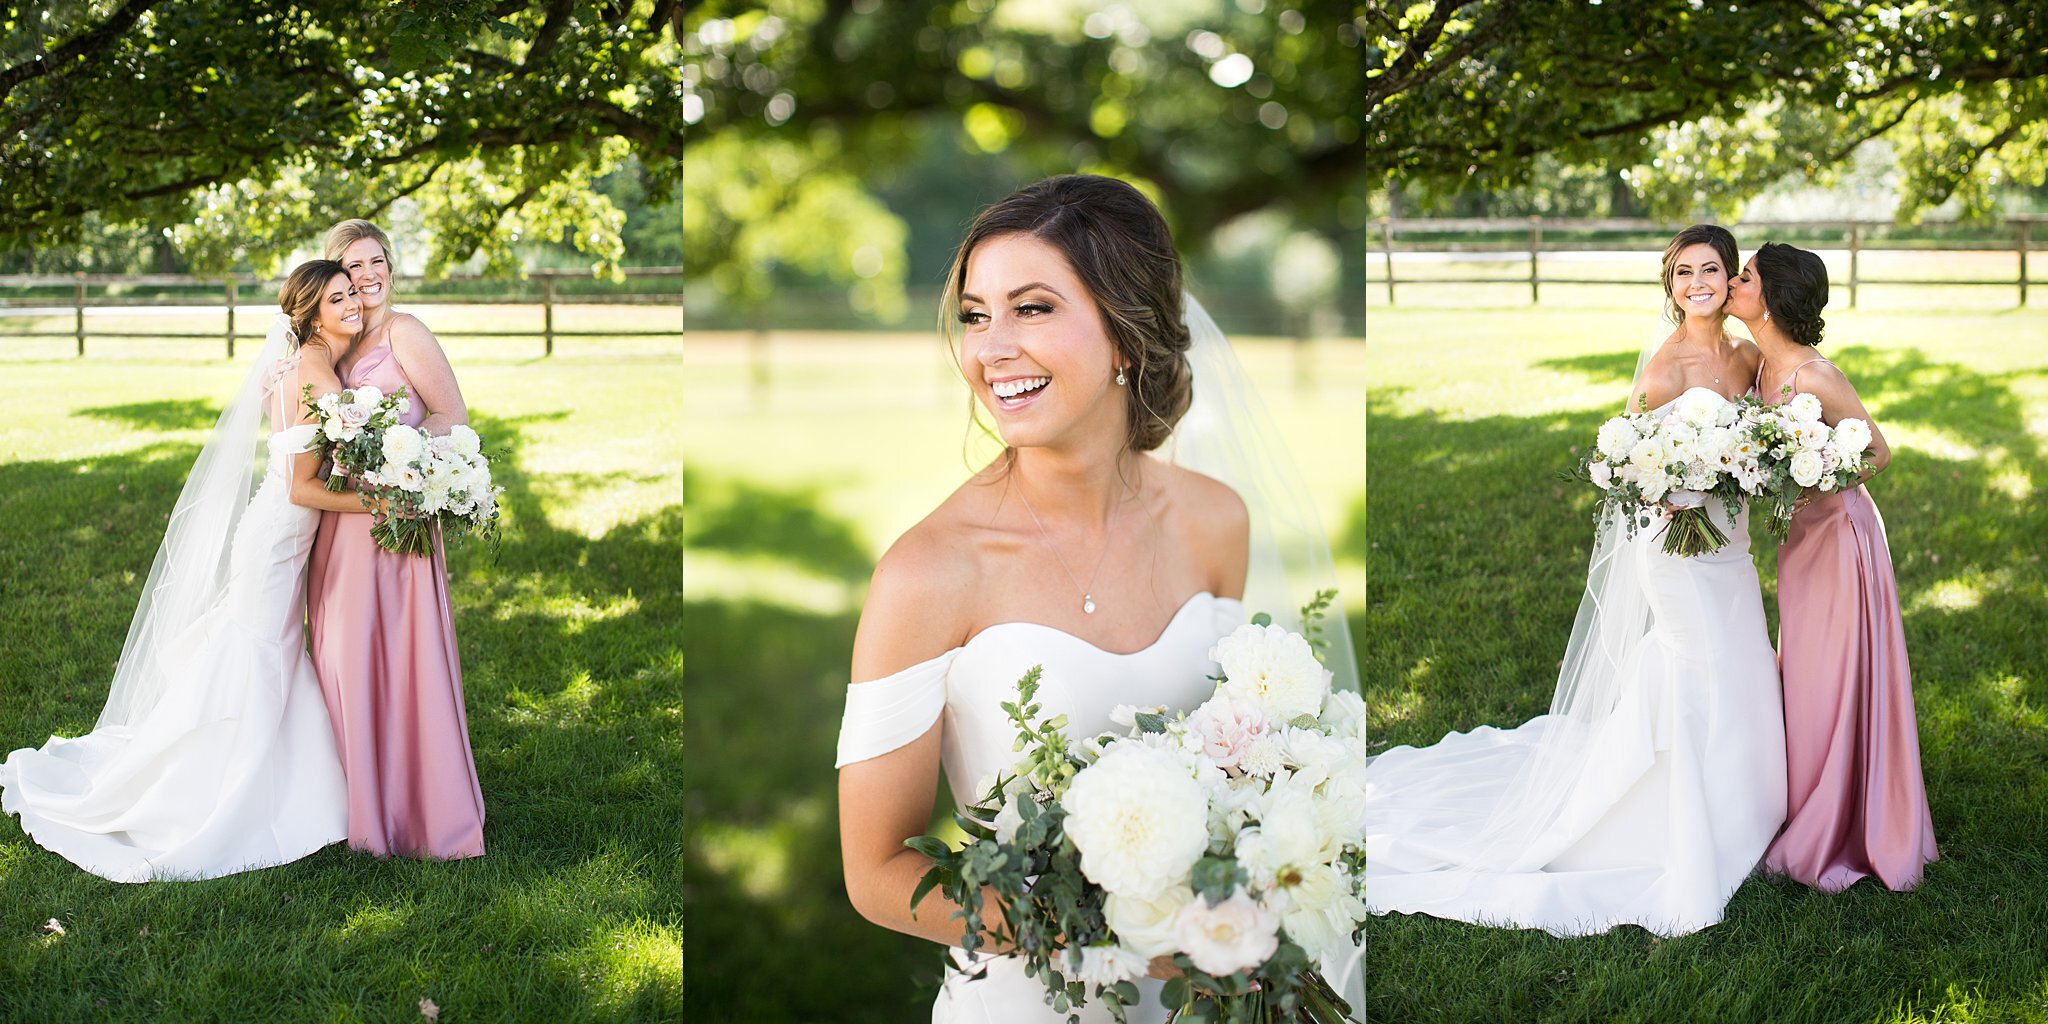  Collage of bridesmaids and bride portraits. 